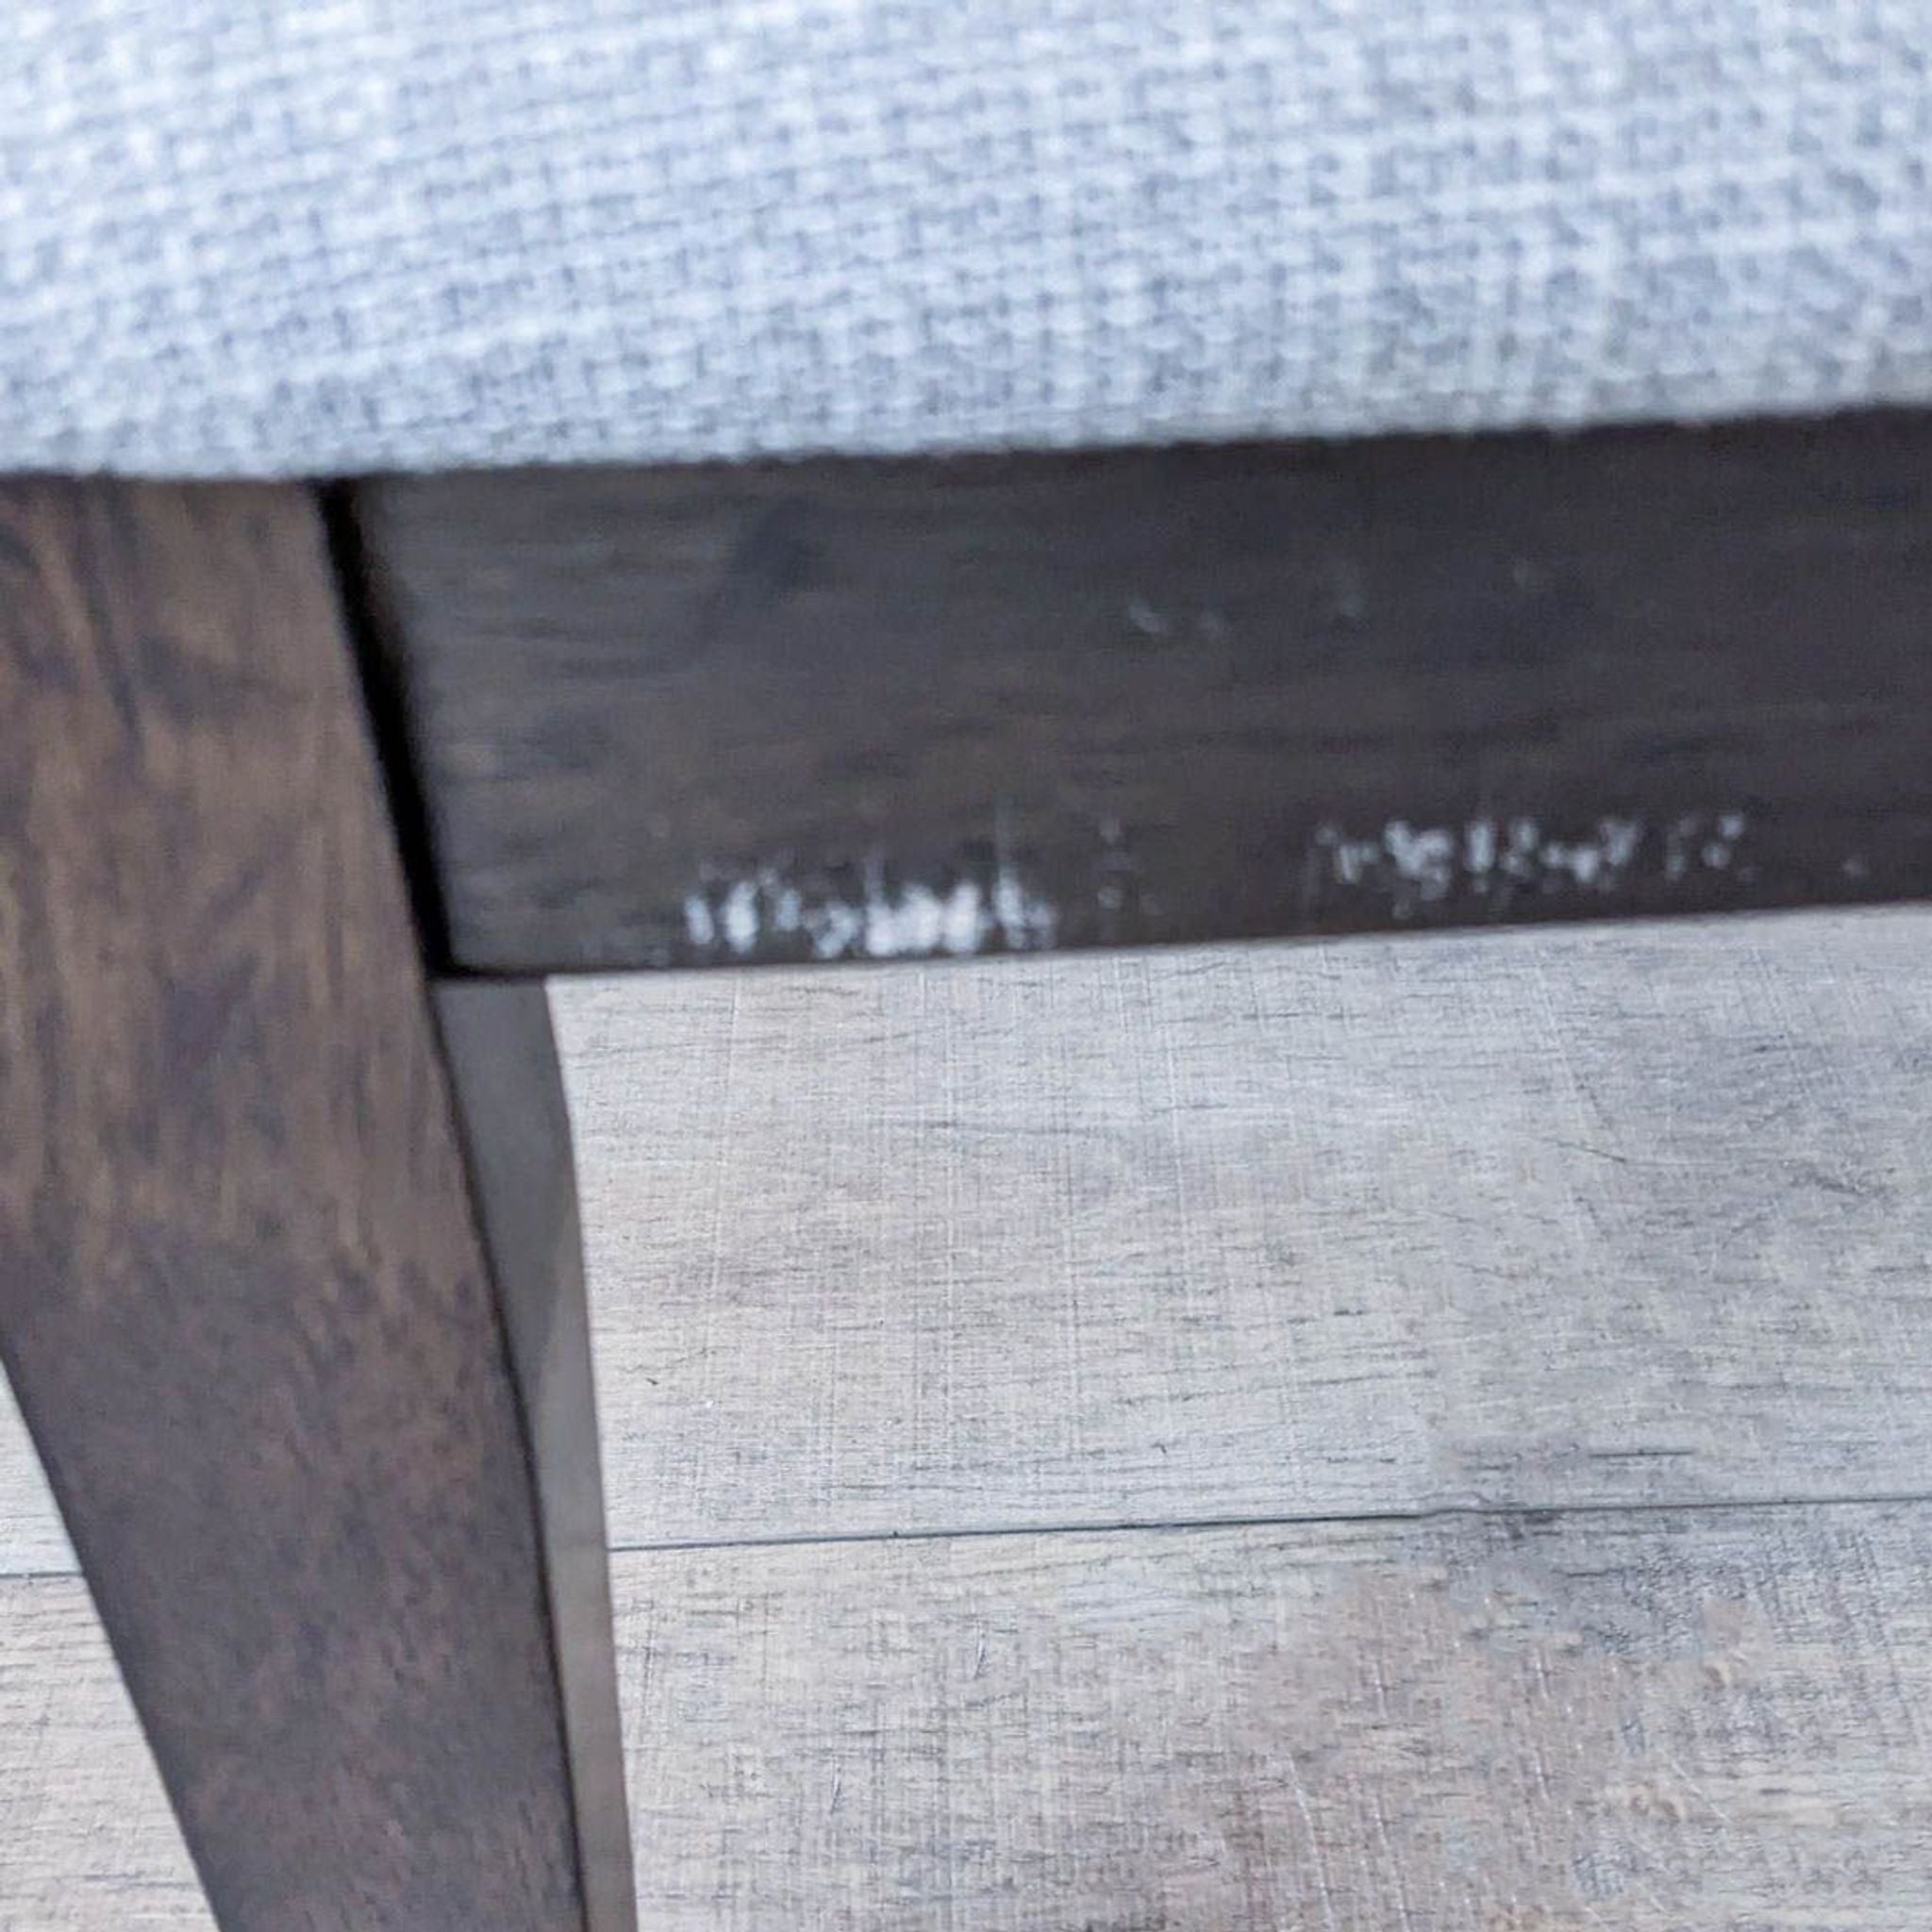 Close-up of a Reperch contemporary dining chair leg with dark finish and part of the grey upholstered seat visible.